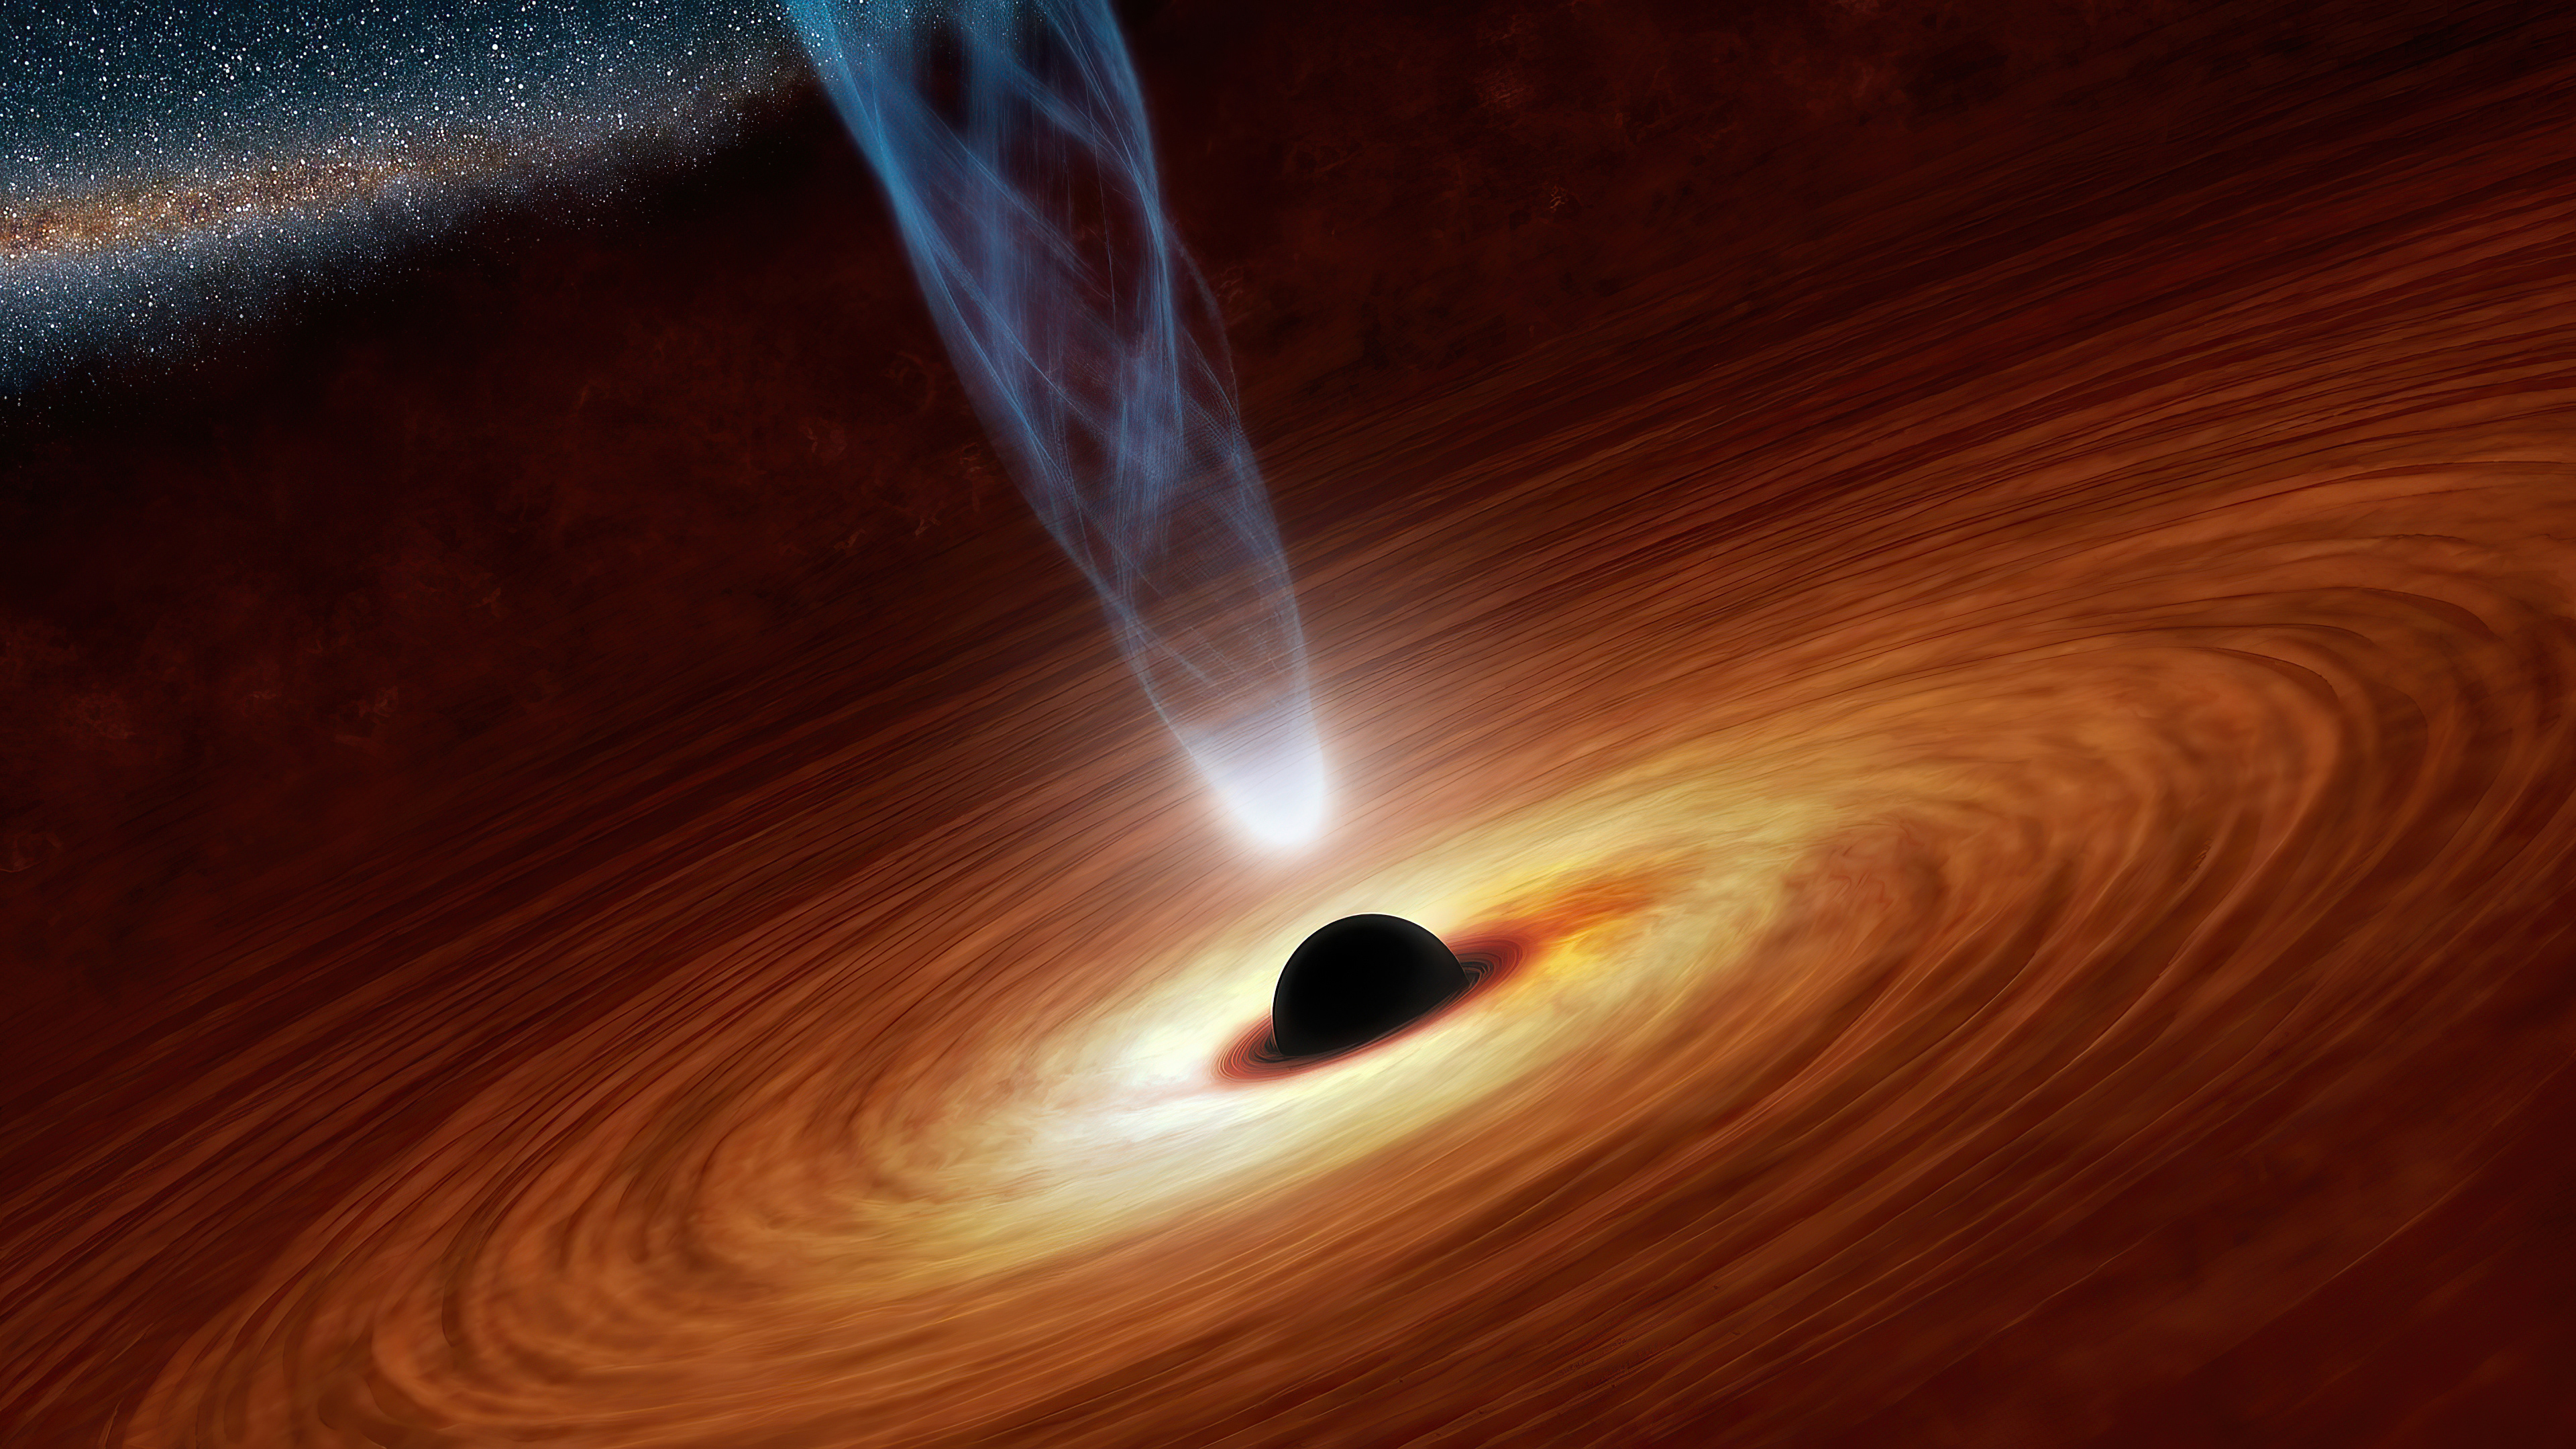 Space Black Hole, HD Digital Universe, 4k Wallpapers, Images